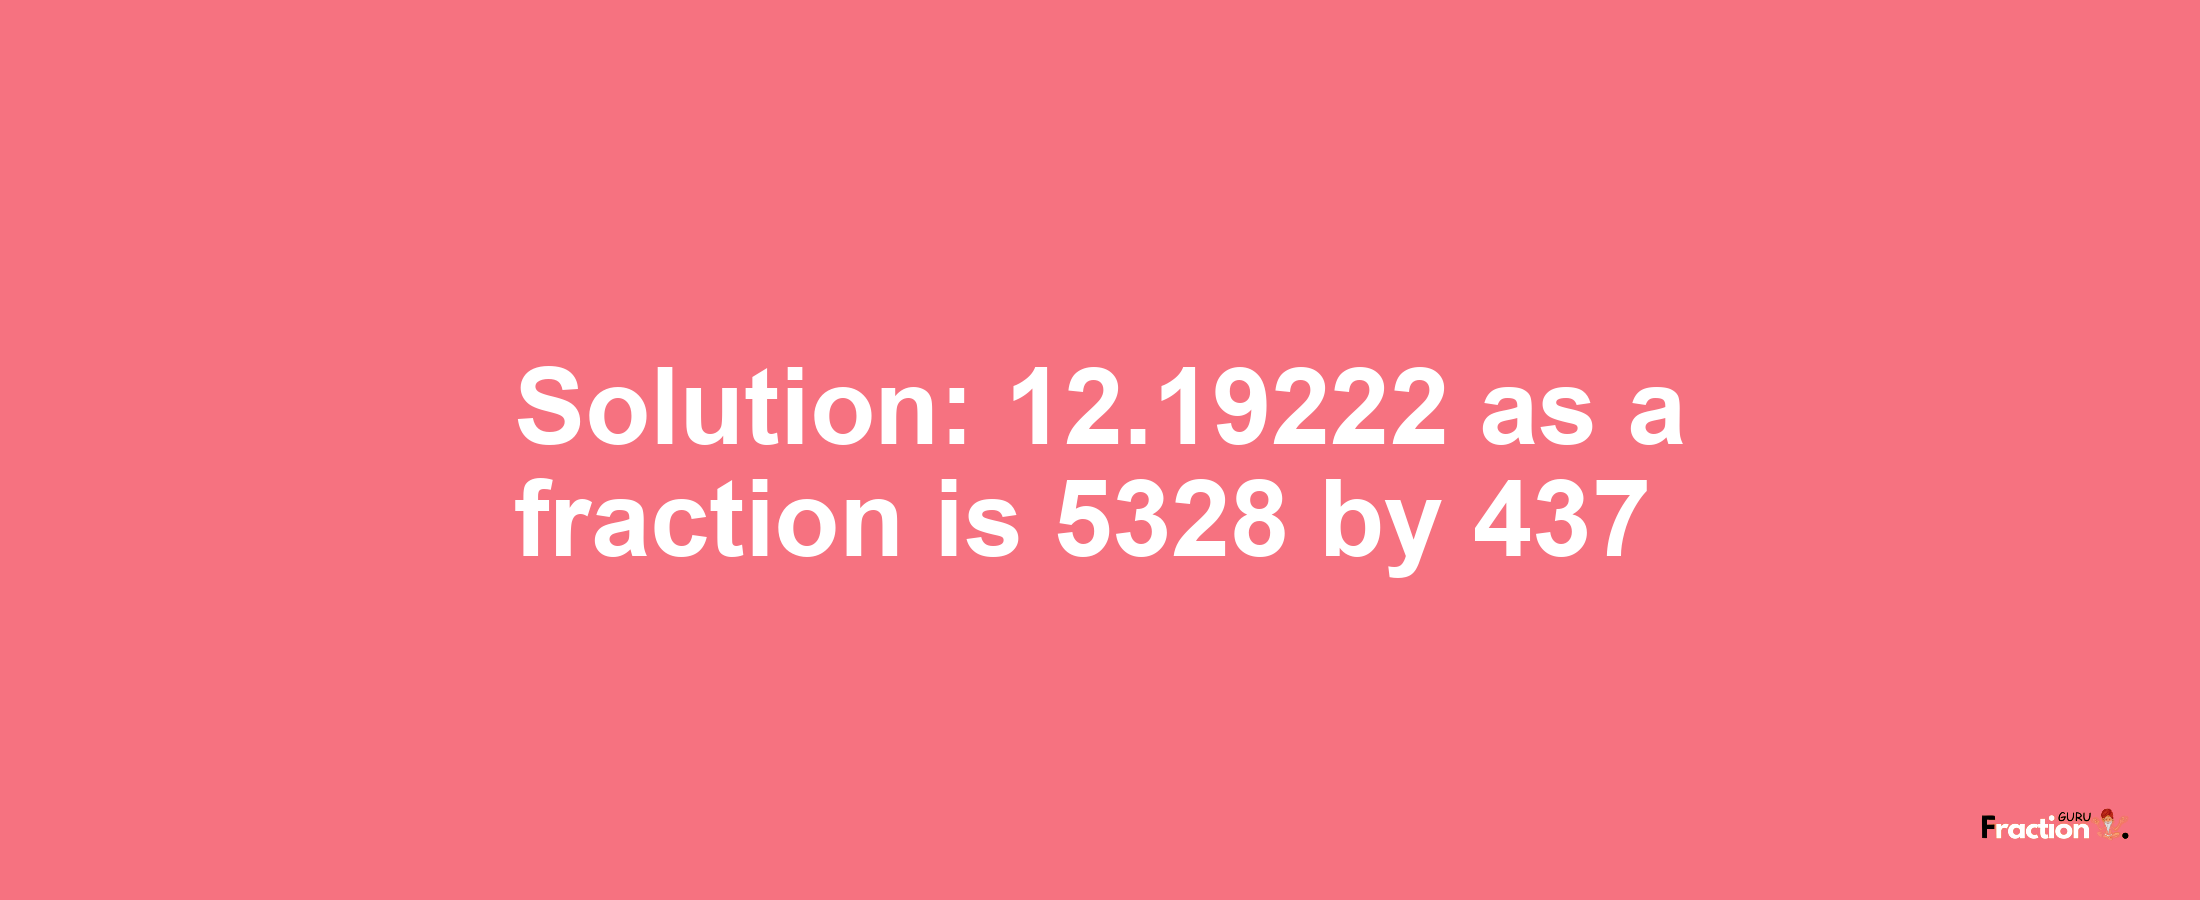 Solution:12.19222 as a fraction is 5328/437